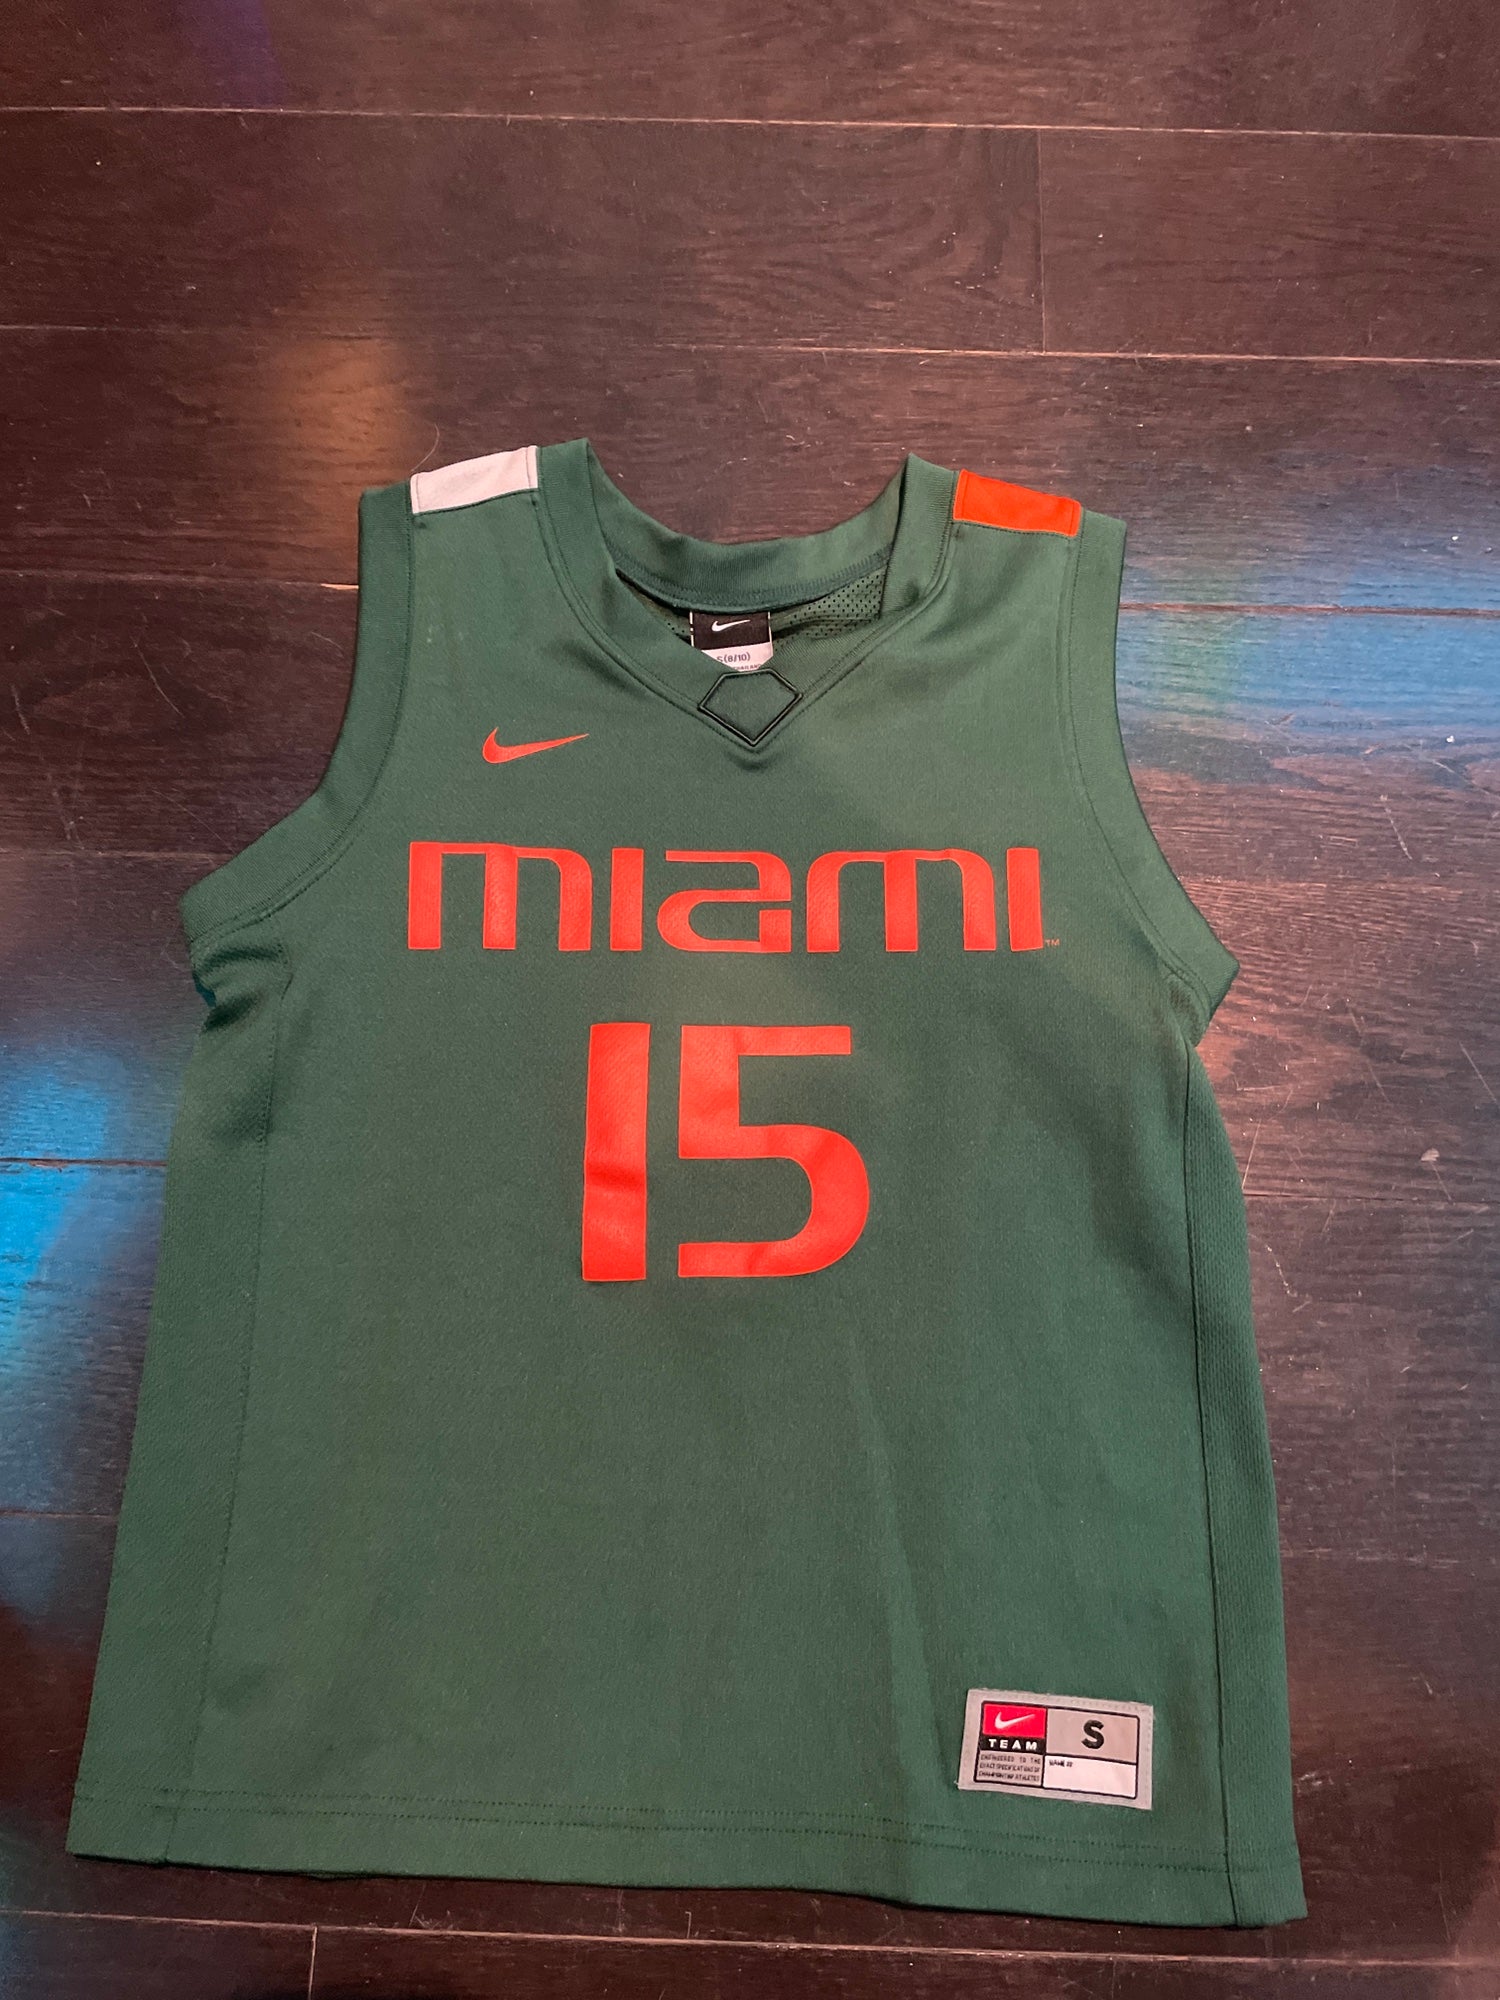 Miami Hurricanes Team-Issued #12 Green Reversible Jersey from the